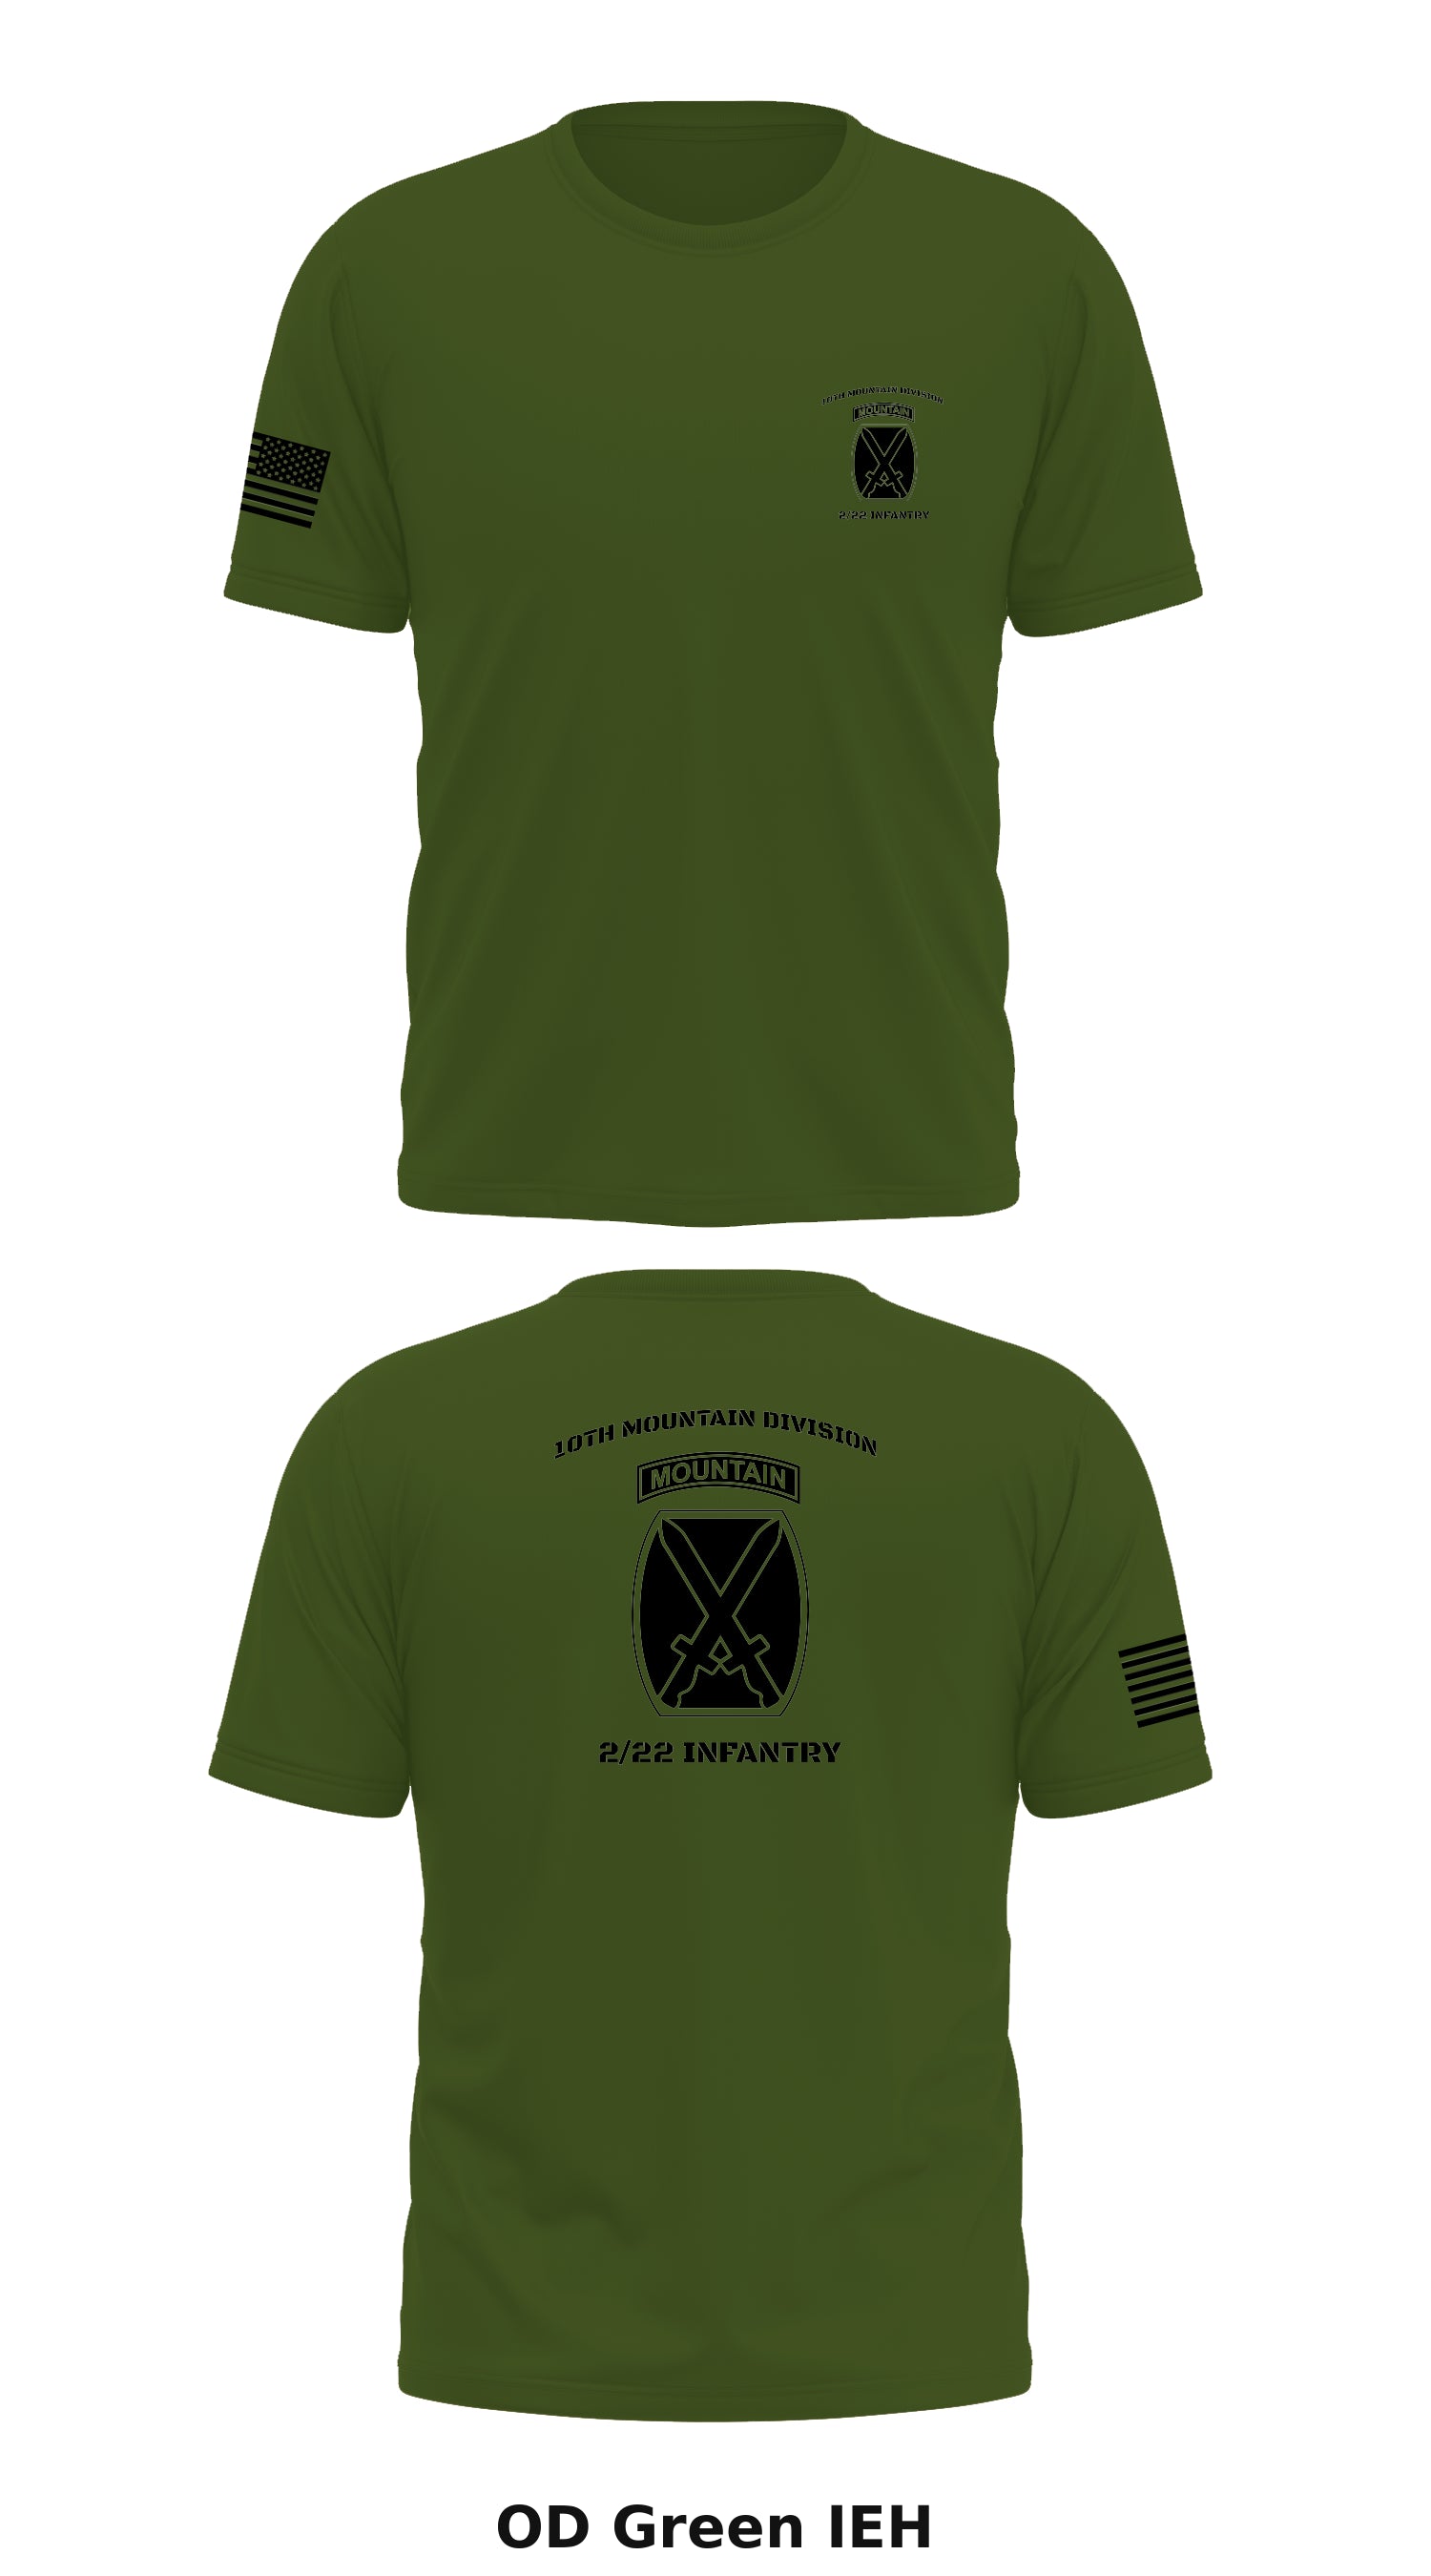 Team 22 represents the 10th Mountain Division during the